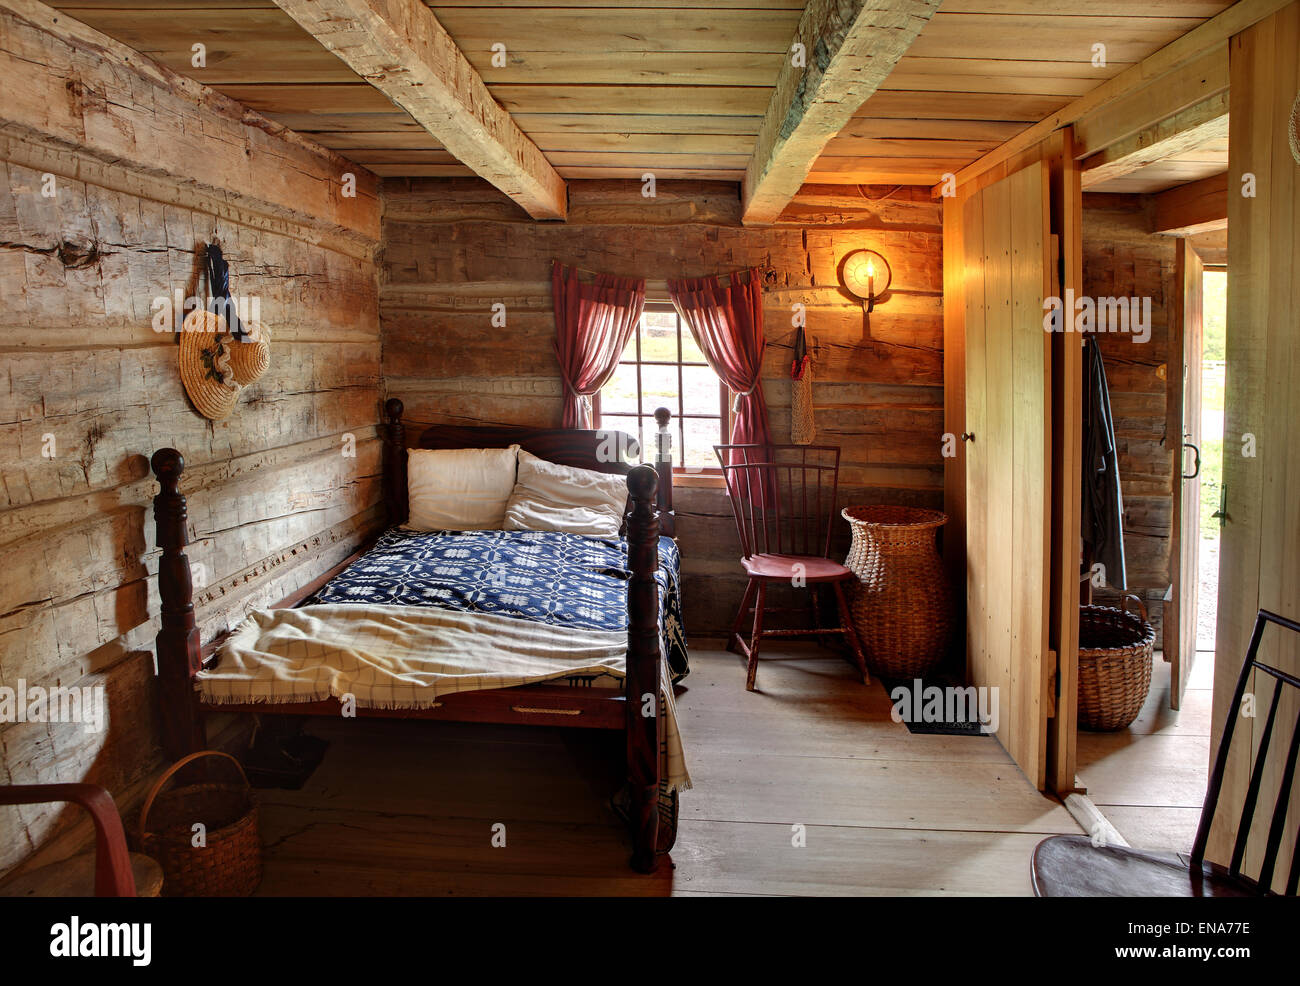 The bedroom interior of the Joseph Smith home at a historical reproduction village. Stock Photo